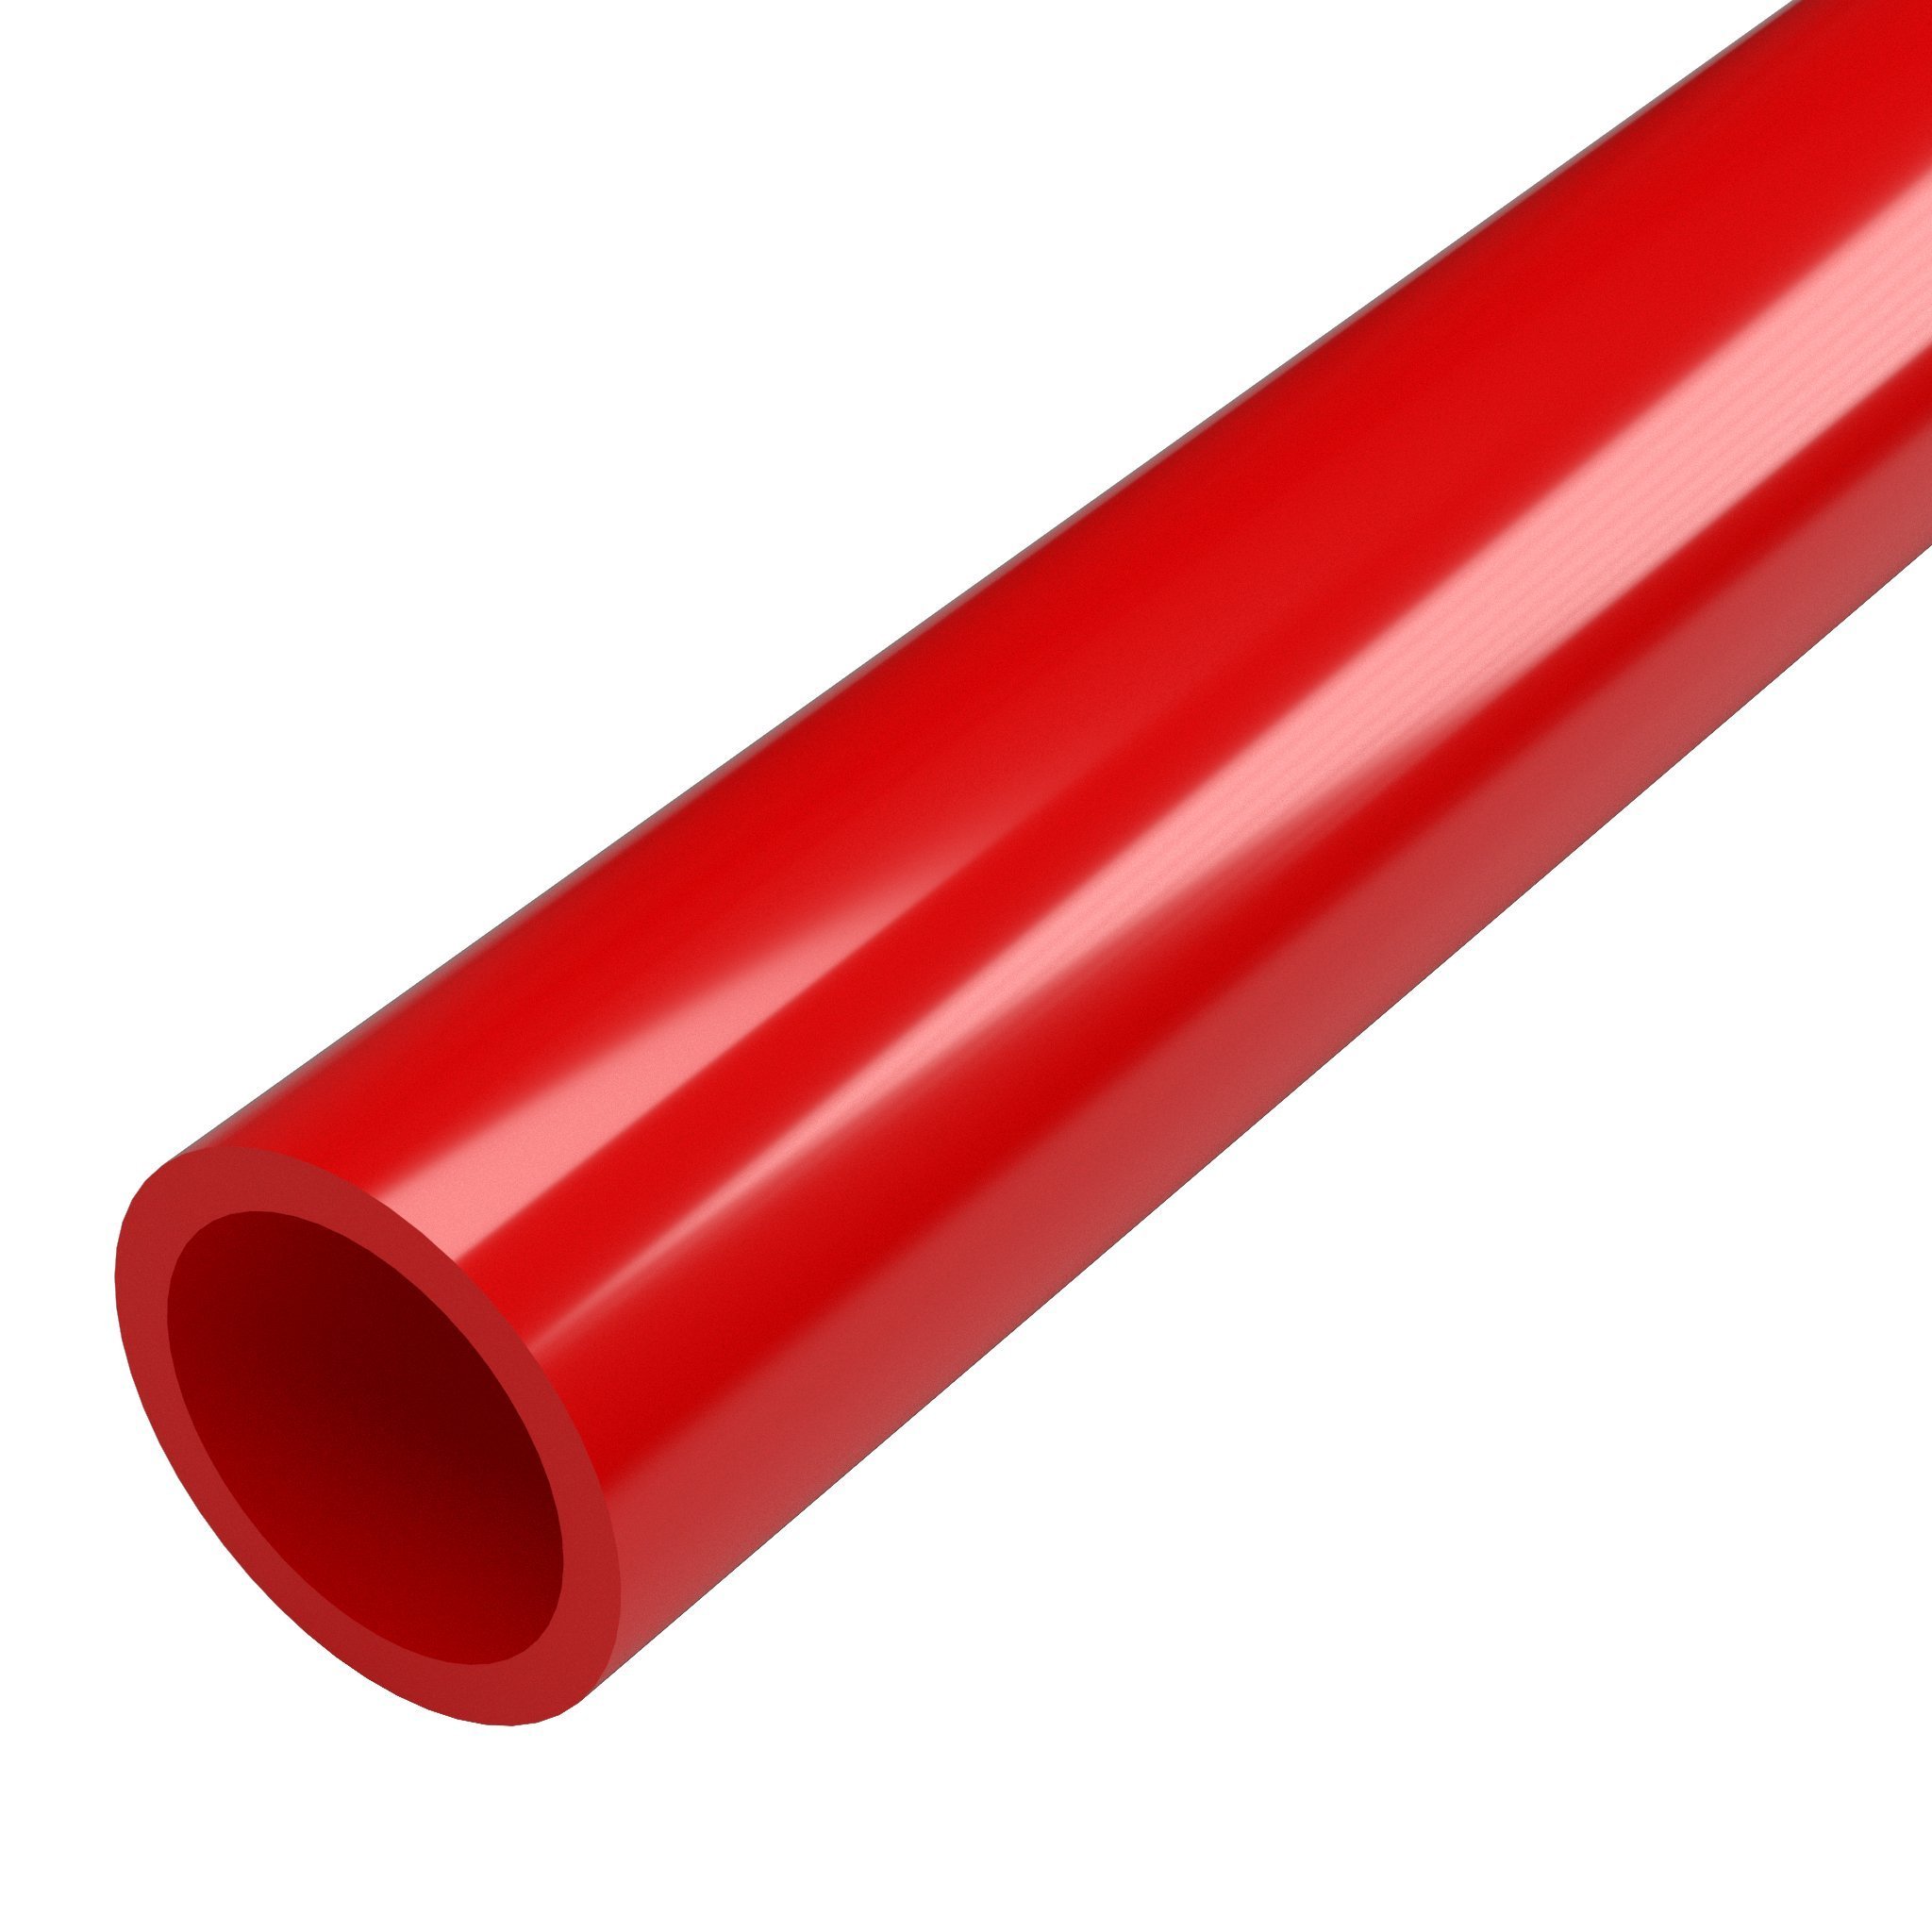 Red pipe photo